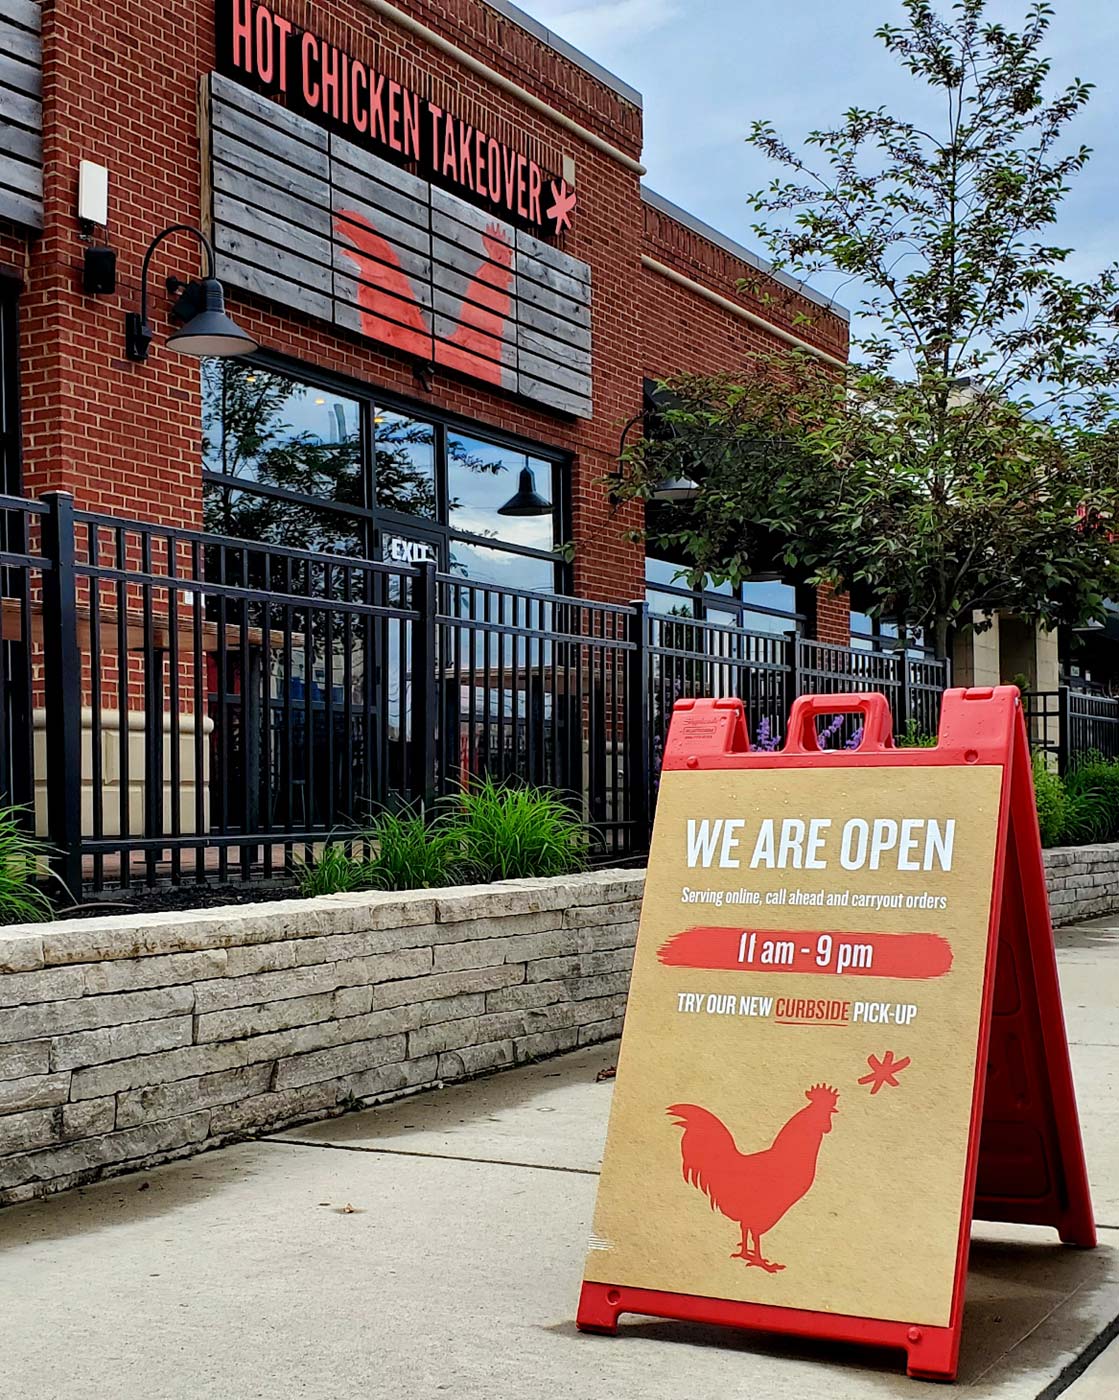 Hot Chicken Takeover will continue to offer carryout while studying how to open its dining areas. Photo by Edible Columbus.